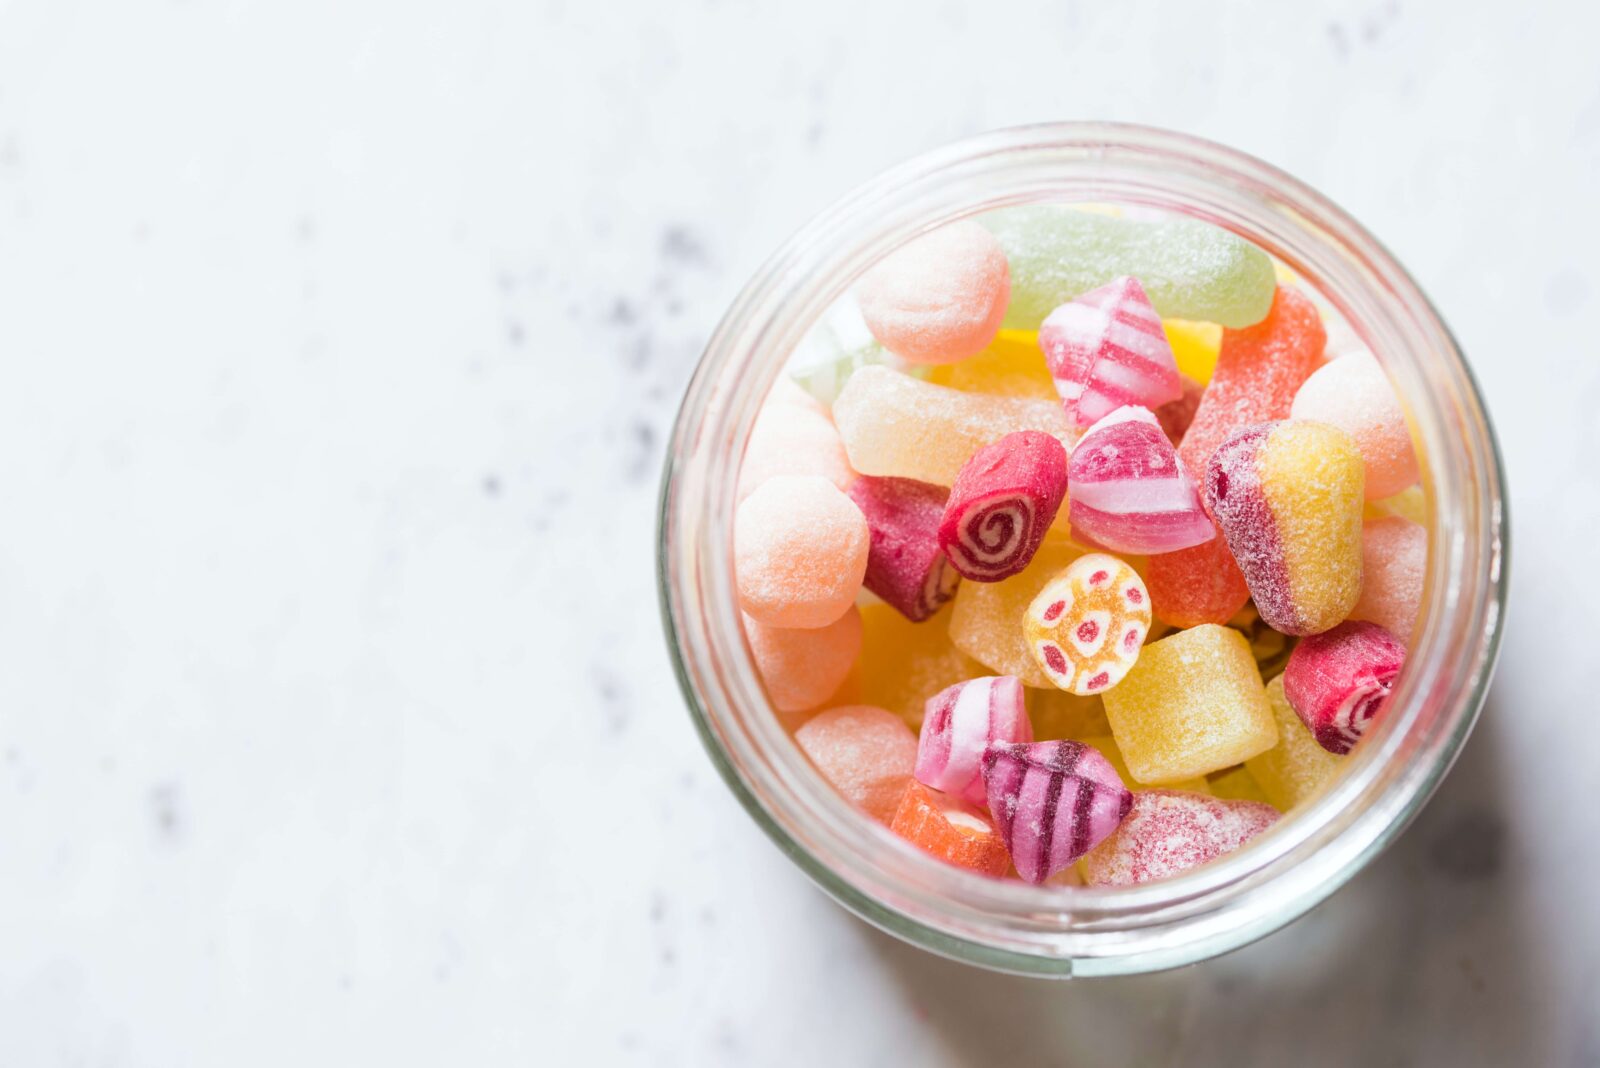 Sugar cravings after lunch or dinner? You are not alone. Image: Unsplash